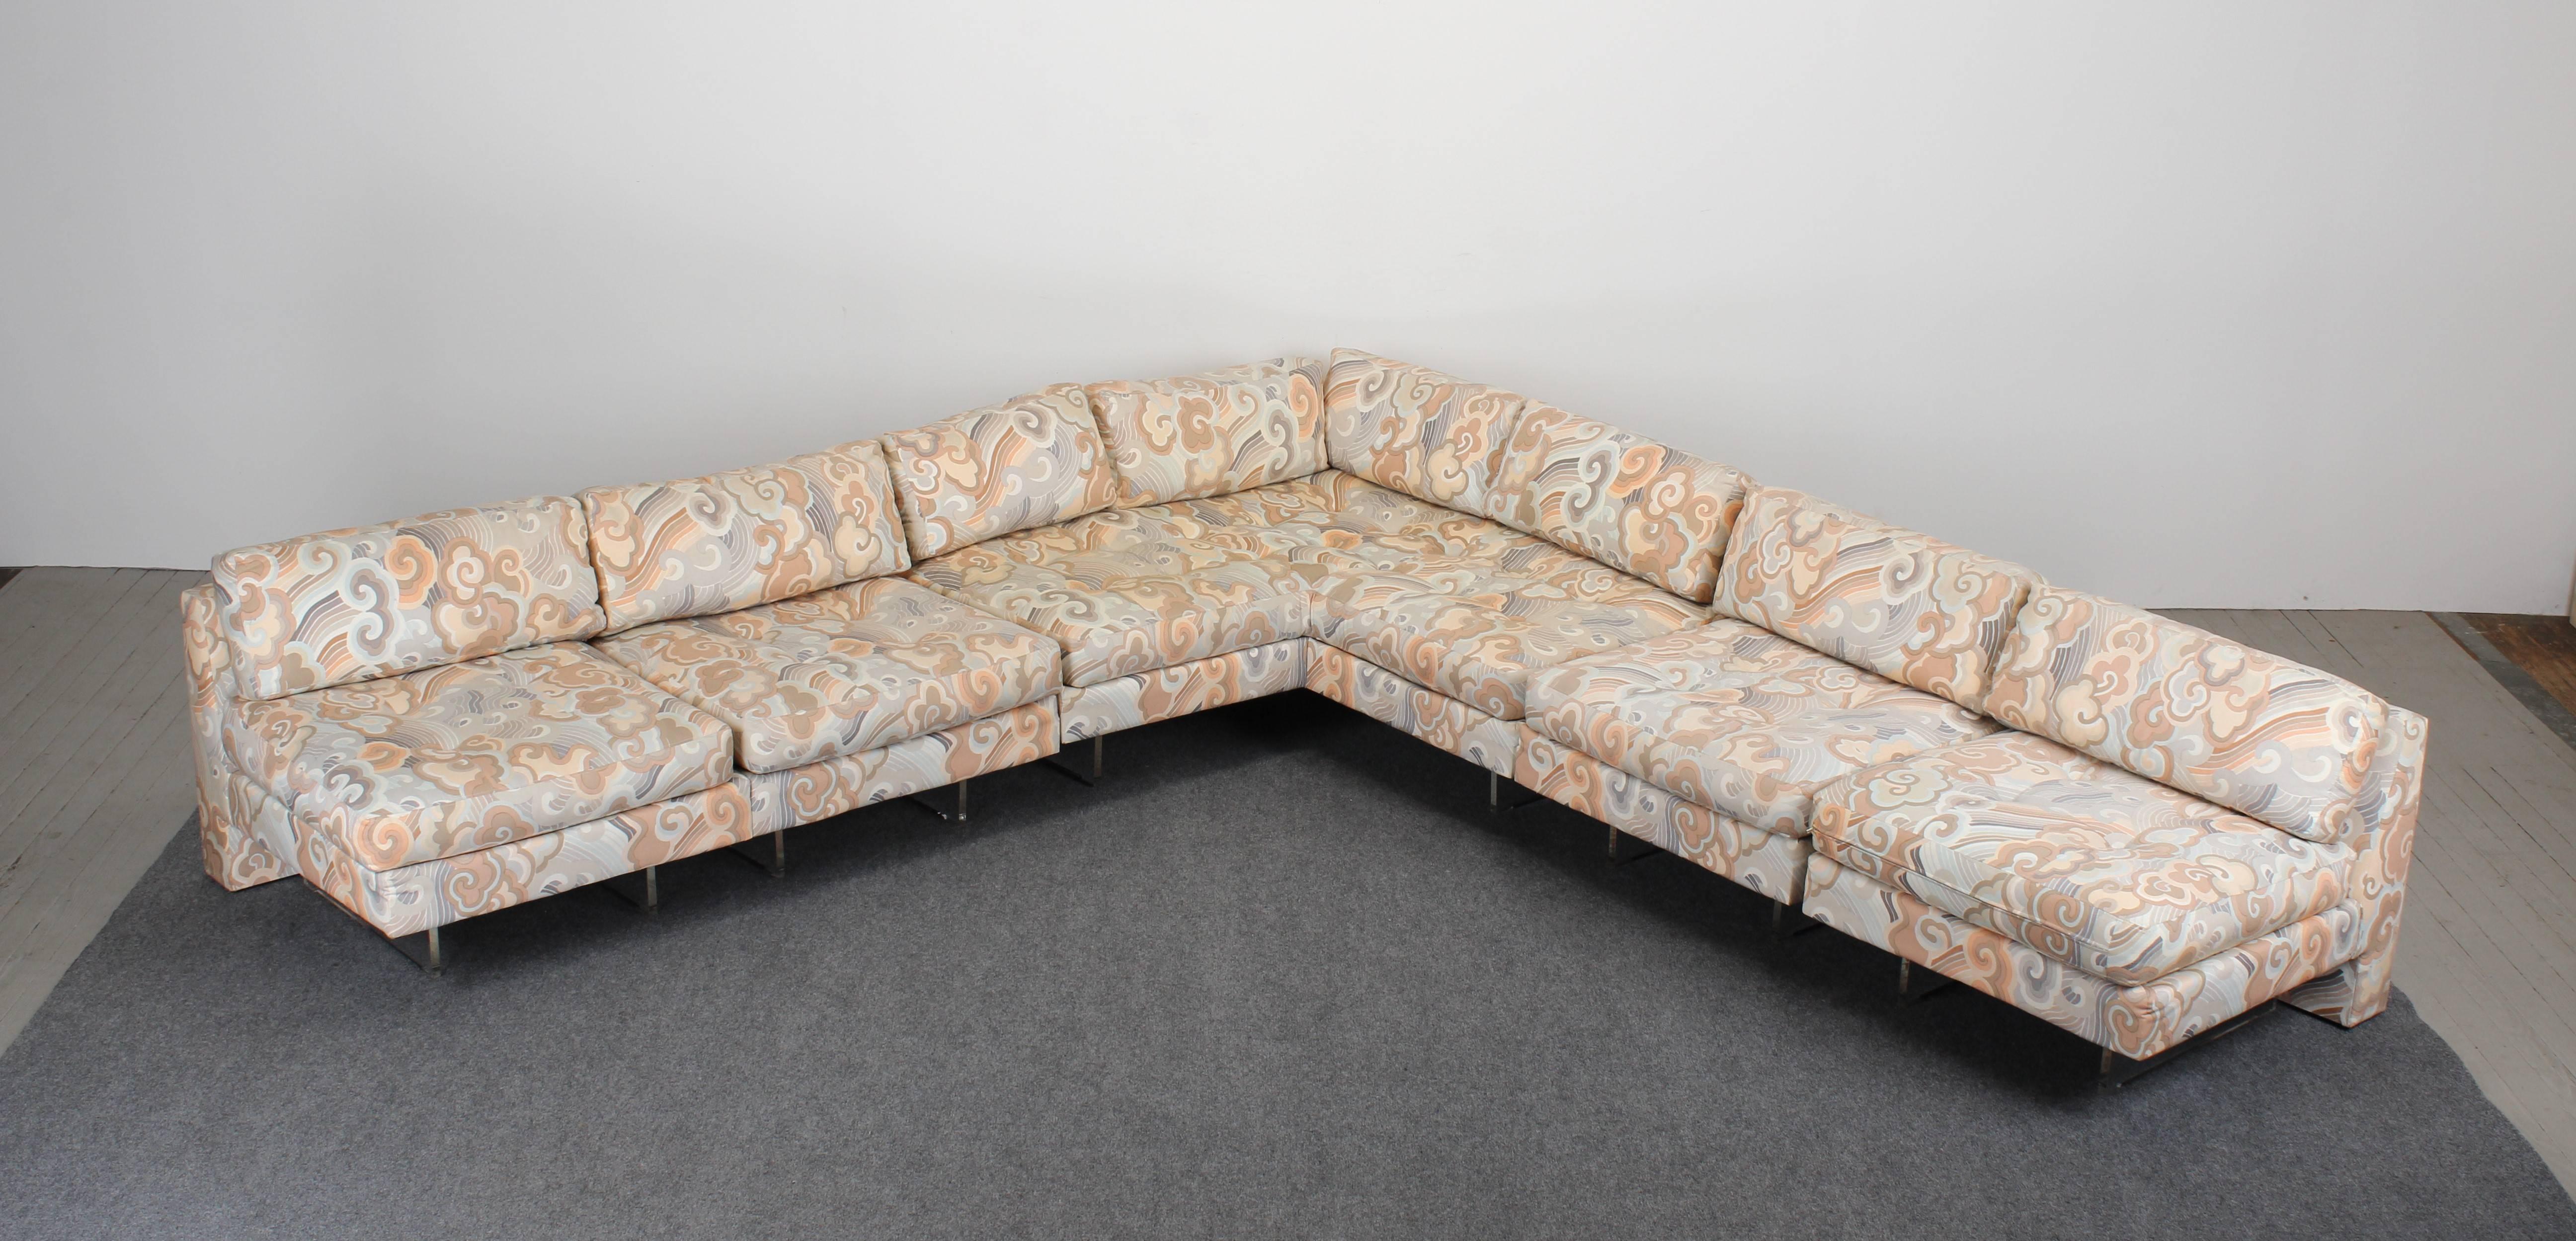 A large, functional Vladimir Kagan omnibus L shaped sectional sofa with Lucite floating bases, 1980. Sofa is in very good condition.
Dimensions:
Seat height 18